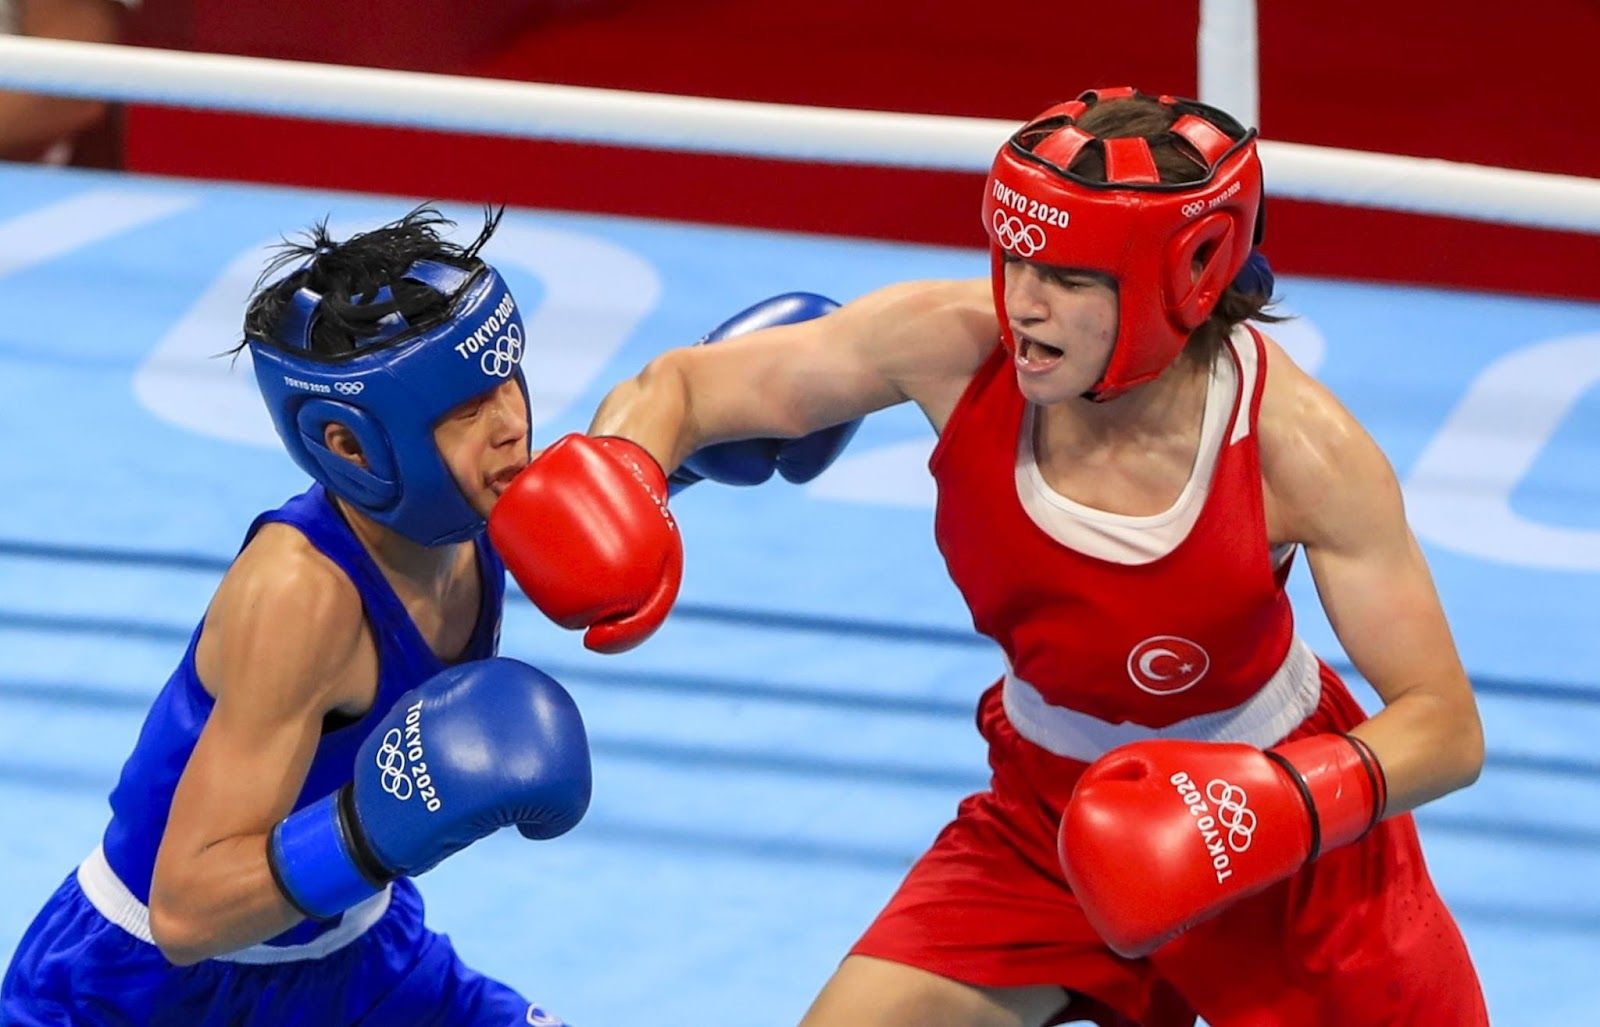 Boxing: AIBA Women's World Championships likely to be postponed